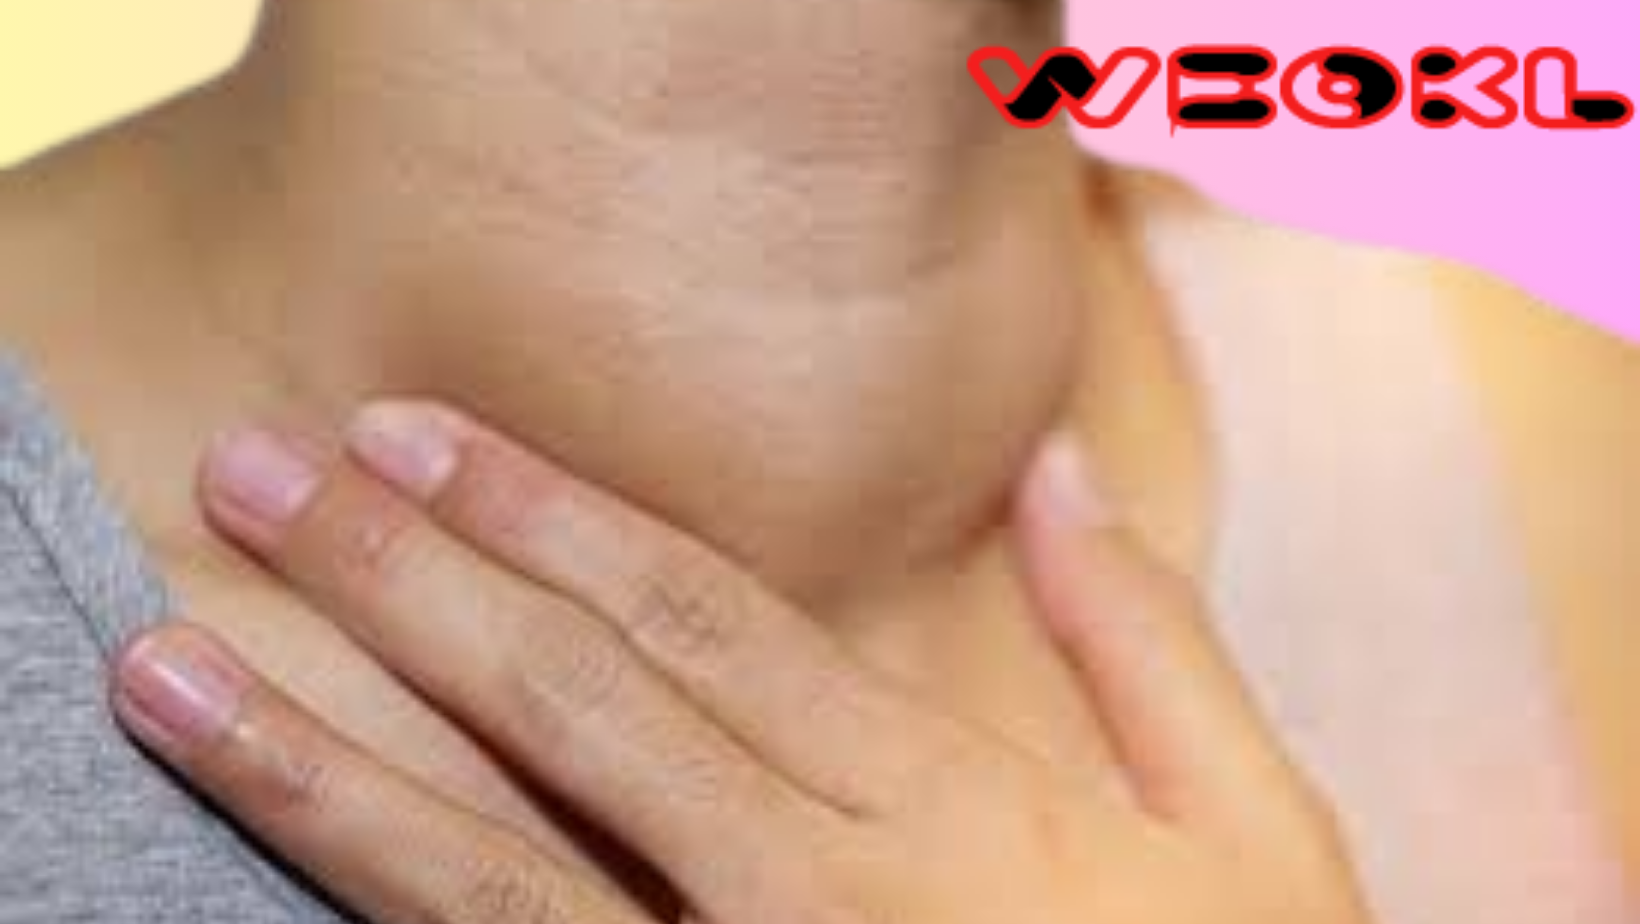 DO YOU HAVE A LUMP ON YOUR NECK, BACK OR BEHIND YOUR EAR? HERE�S WHAT YOU NEED TO KNOW